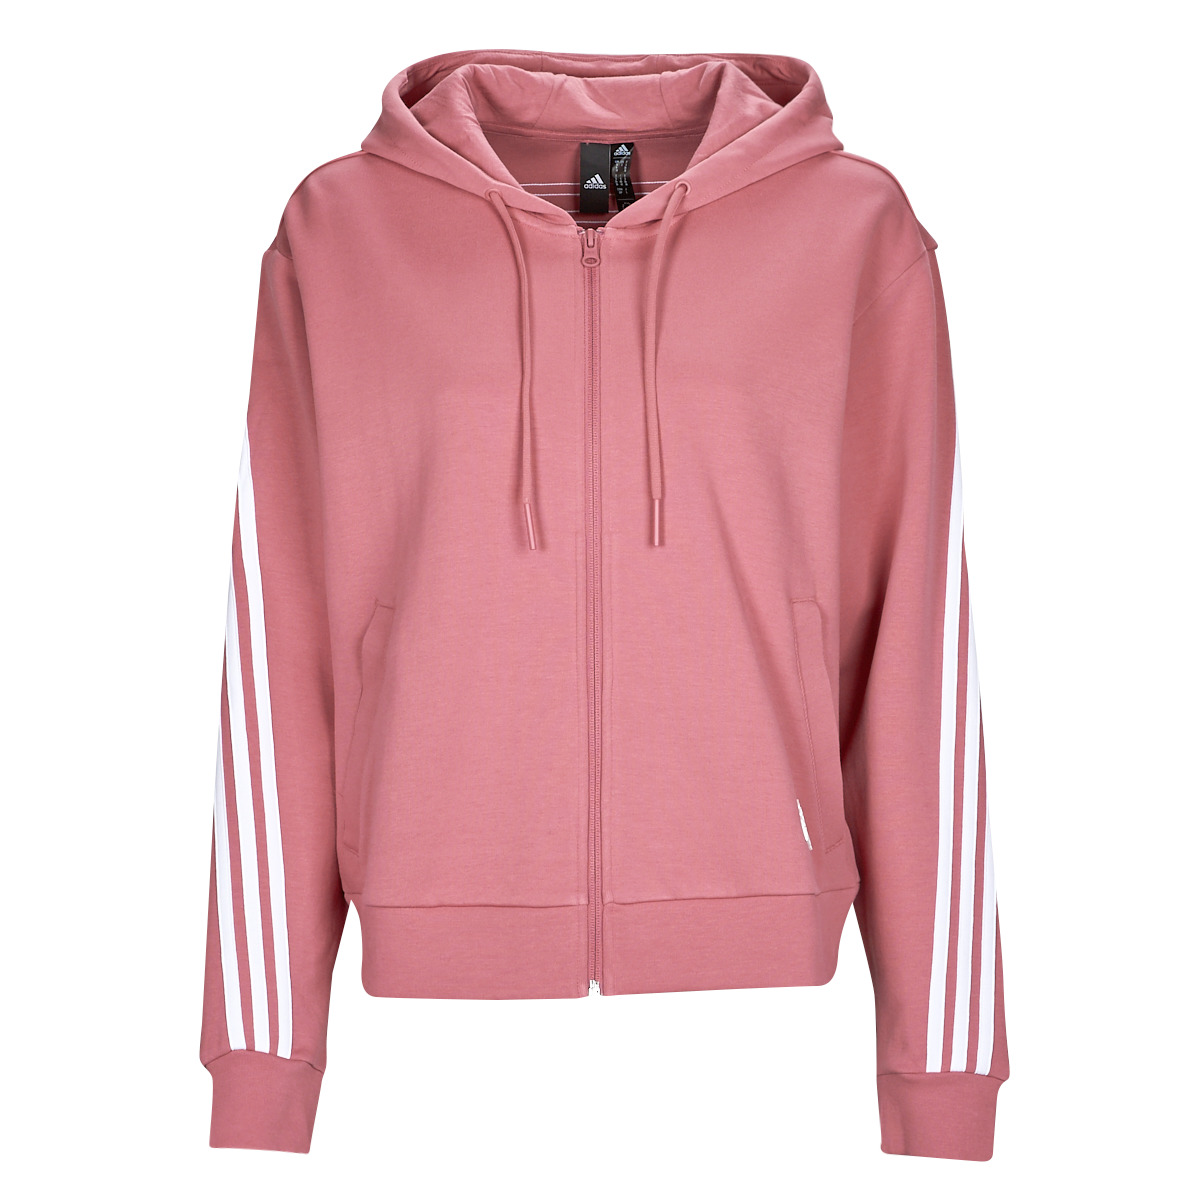 FI | 3S Pink 66,40 FZ Adidas Jackets Spartoo Women delivery € Clothing Sportswear - - Europe Fast !